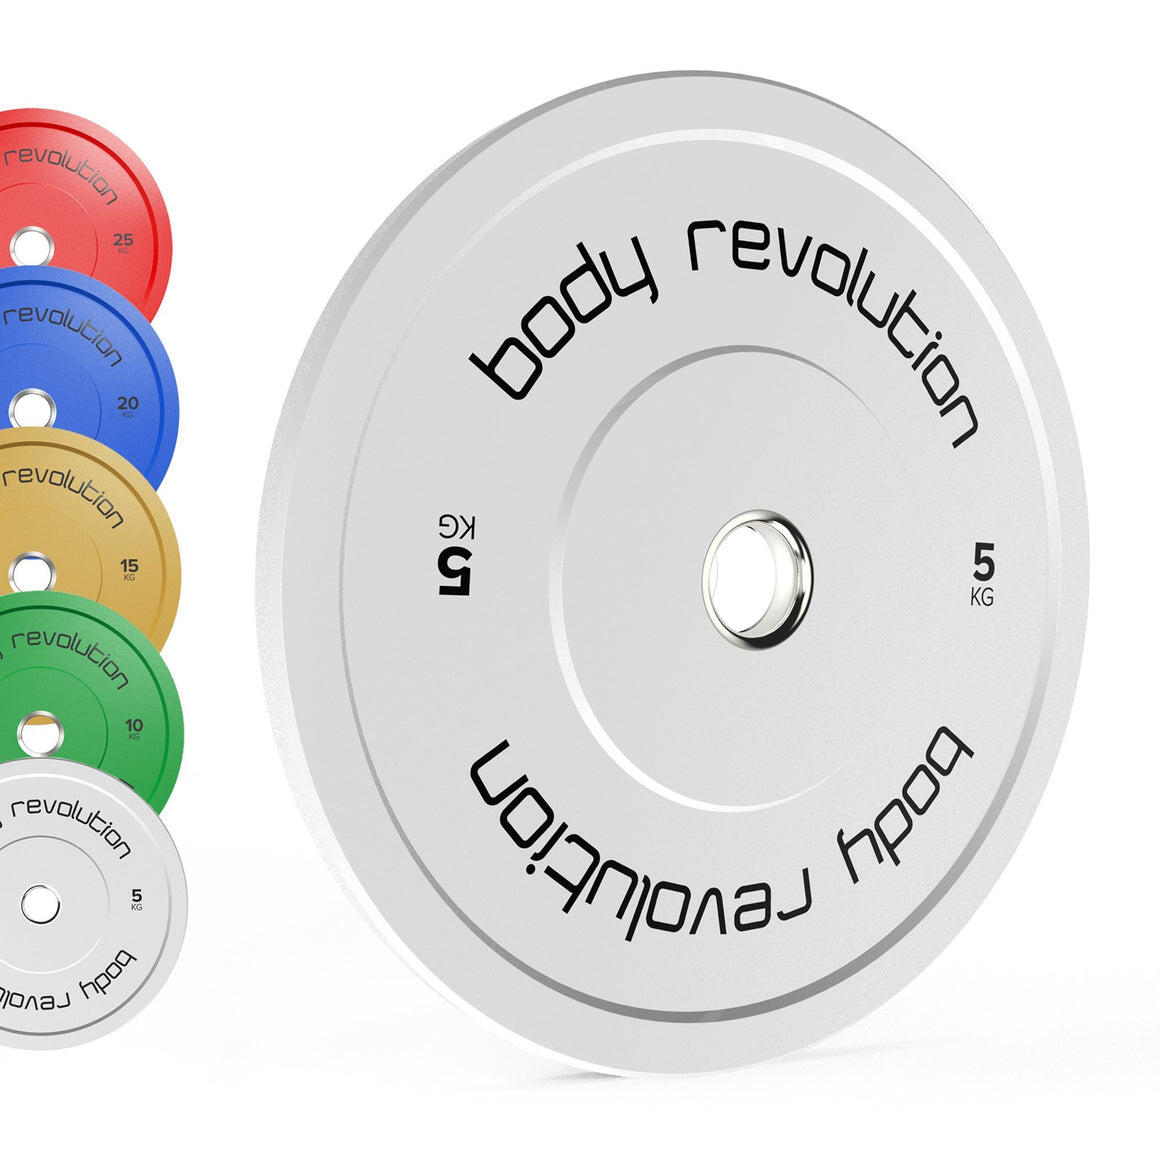 BODY REVOLUTION Olympic Bumper Plates - Colour Rubber Coated Weight Plates for 2inch Barbells